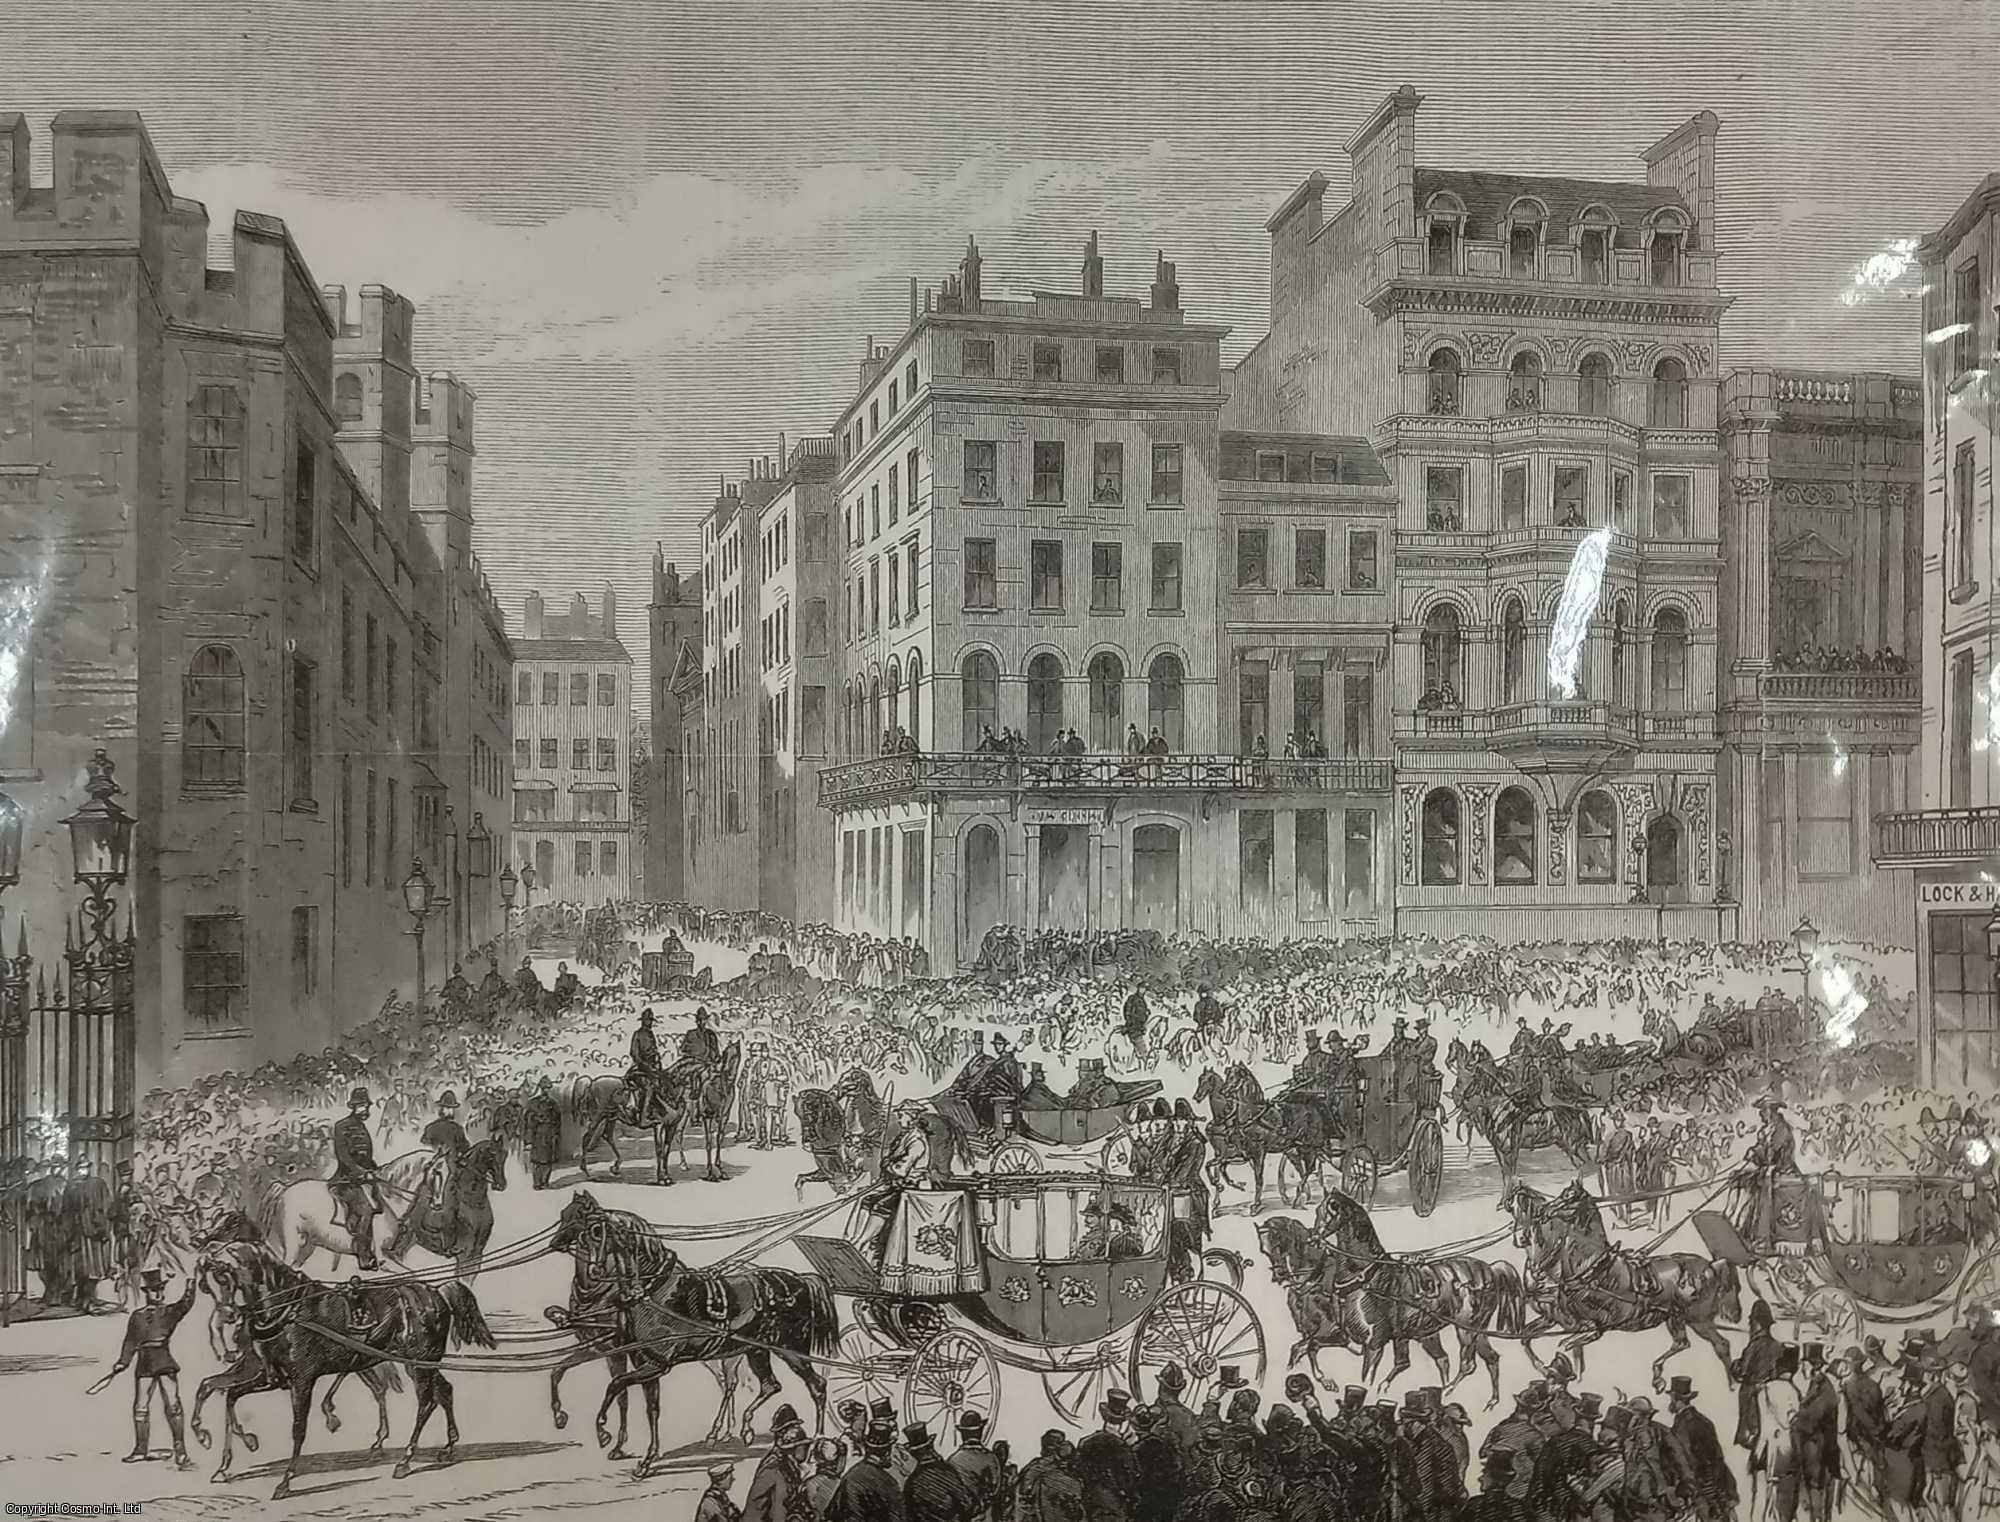 LONDON - Presentation of Address to the King of the Belgians: The City Procession in Pall Mall. An original print from the Illustrated London News, 1869.